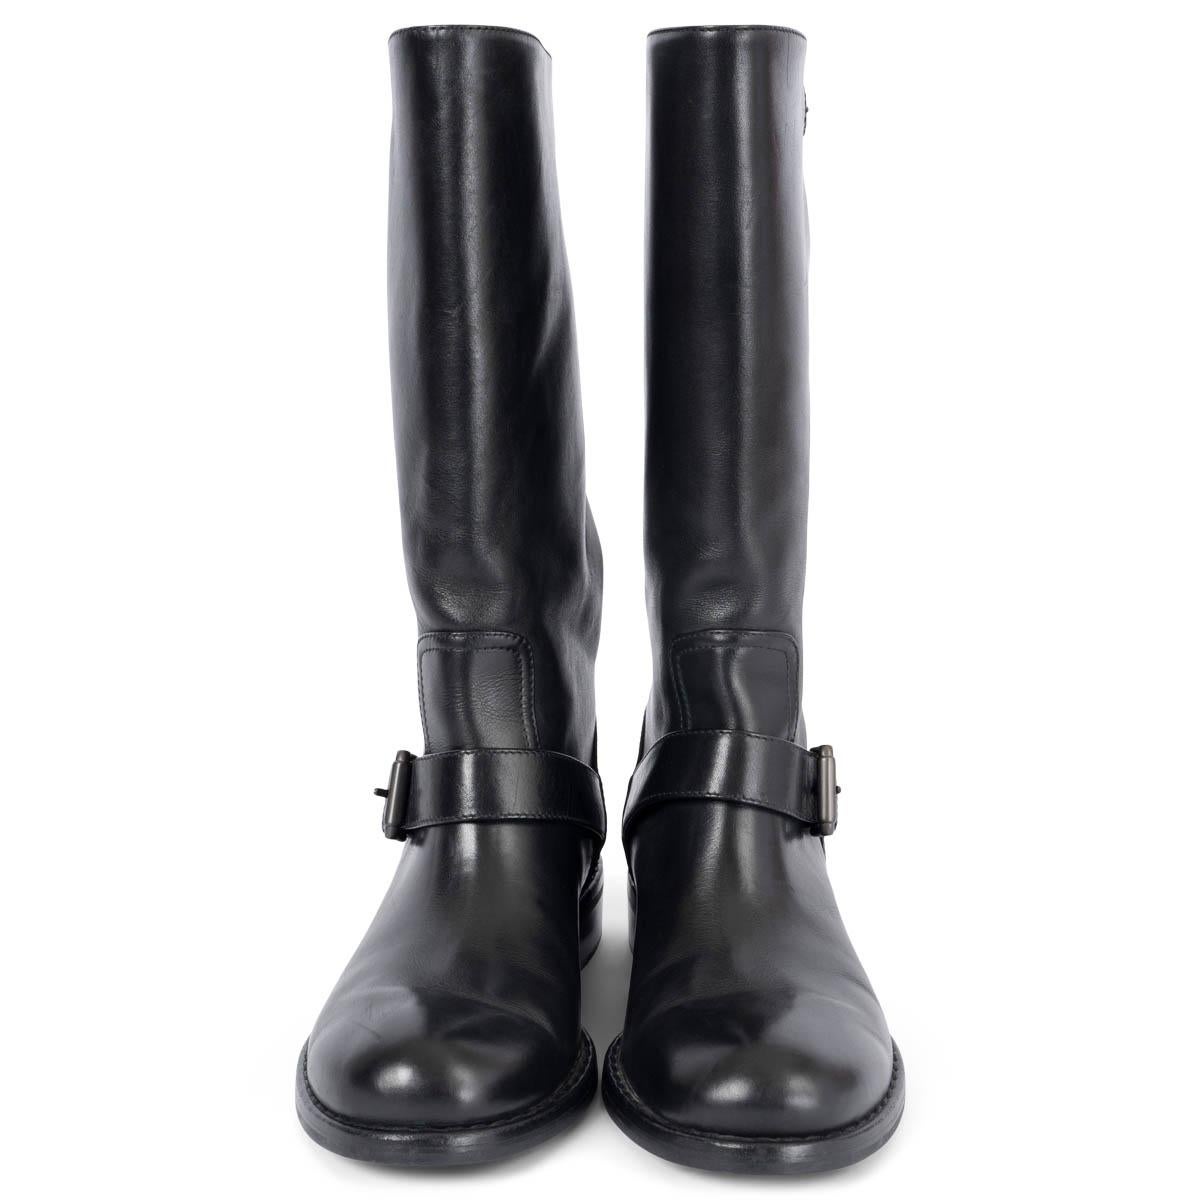 100% authentic Bottega Veneta mid-calf biker boots in smooth black leather featuring gunmetal buckles. Have been worn and are in excellent condition. 

Measurements
Imprinted Size	36
Shoe Size	36
Inside Sole	23cm (9in)
Width	7.5cm (2.9in)
Heel	3cm